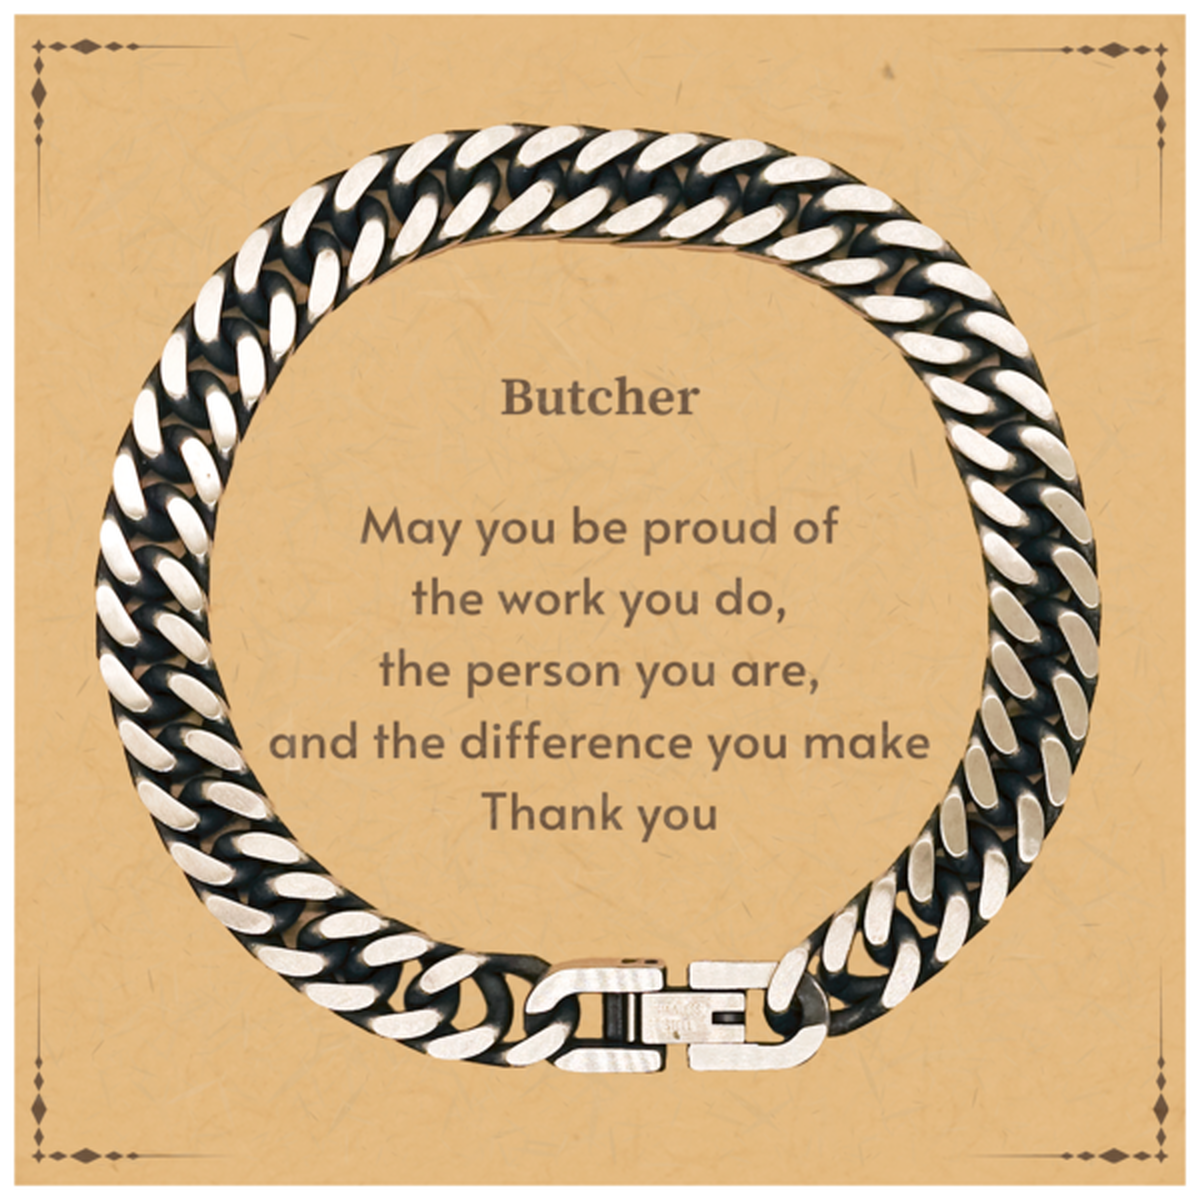 Heartwarming Cuban Link Chain Bracelet Retirement Coworkers Gifts for Butcher, Butcher May You be proud of the work you do, the person you are Gifts for Boss Men Women Friends